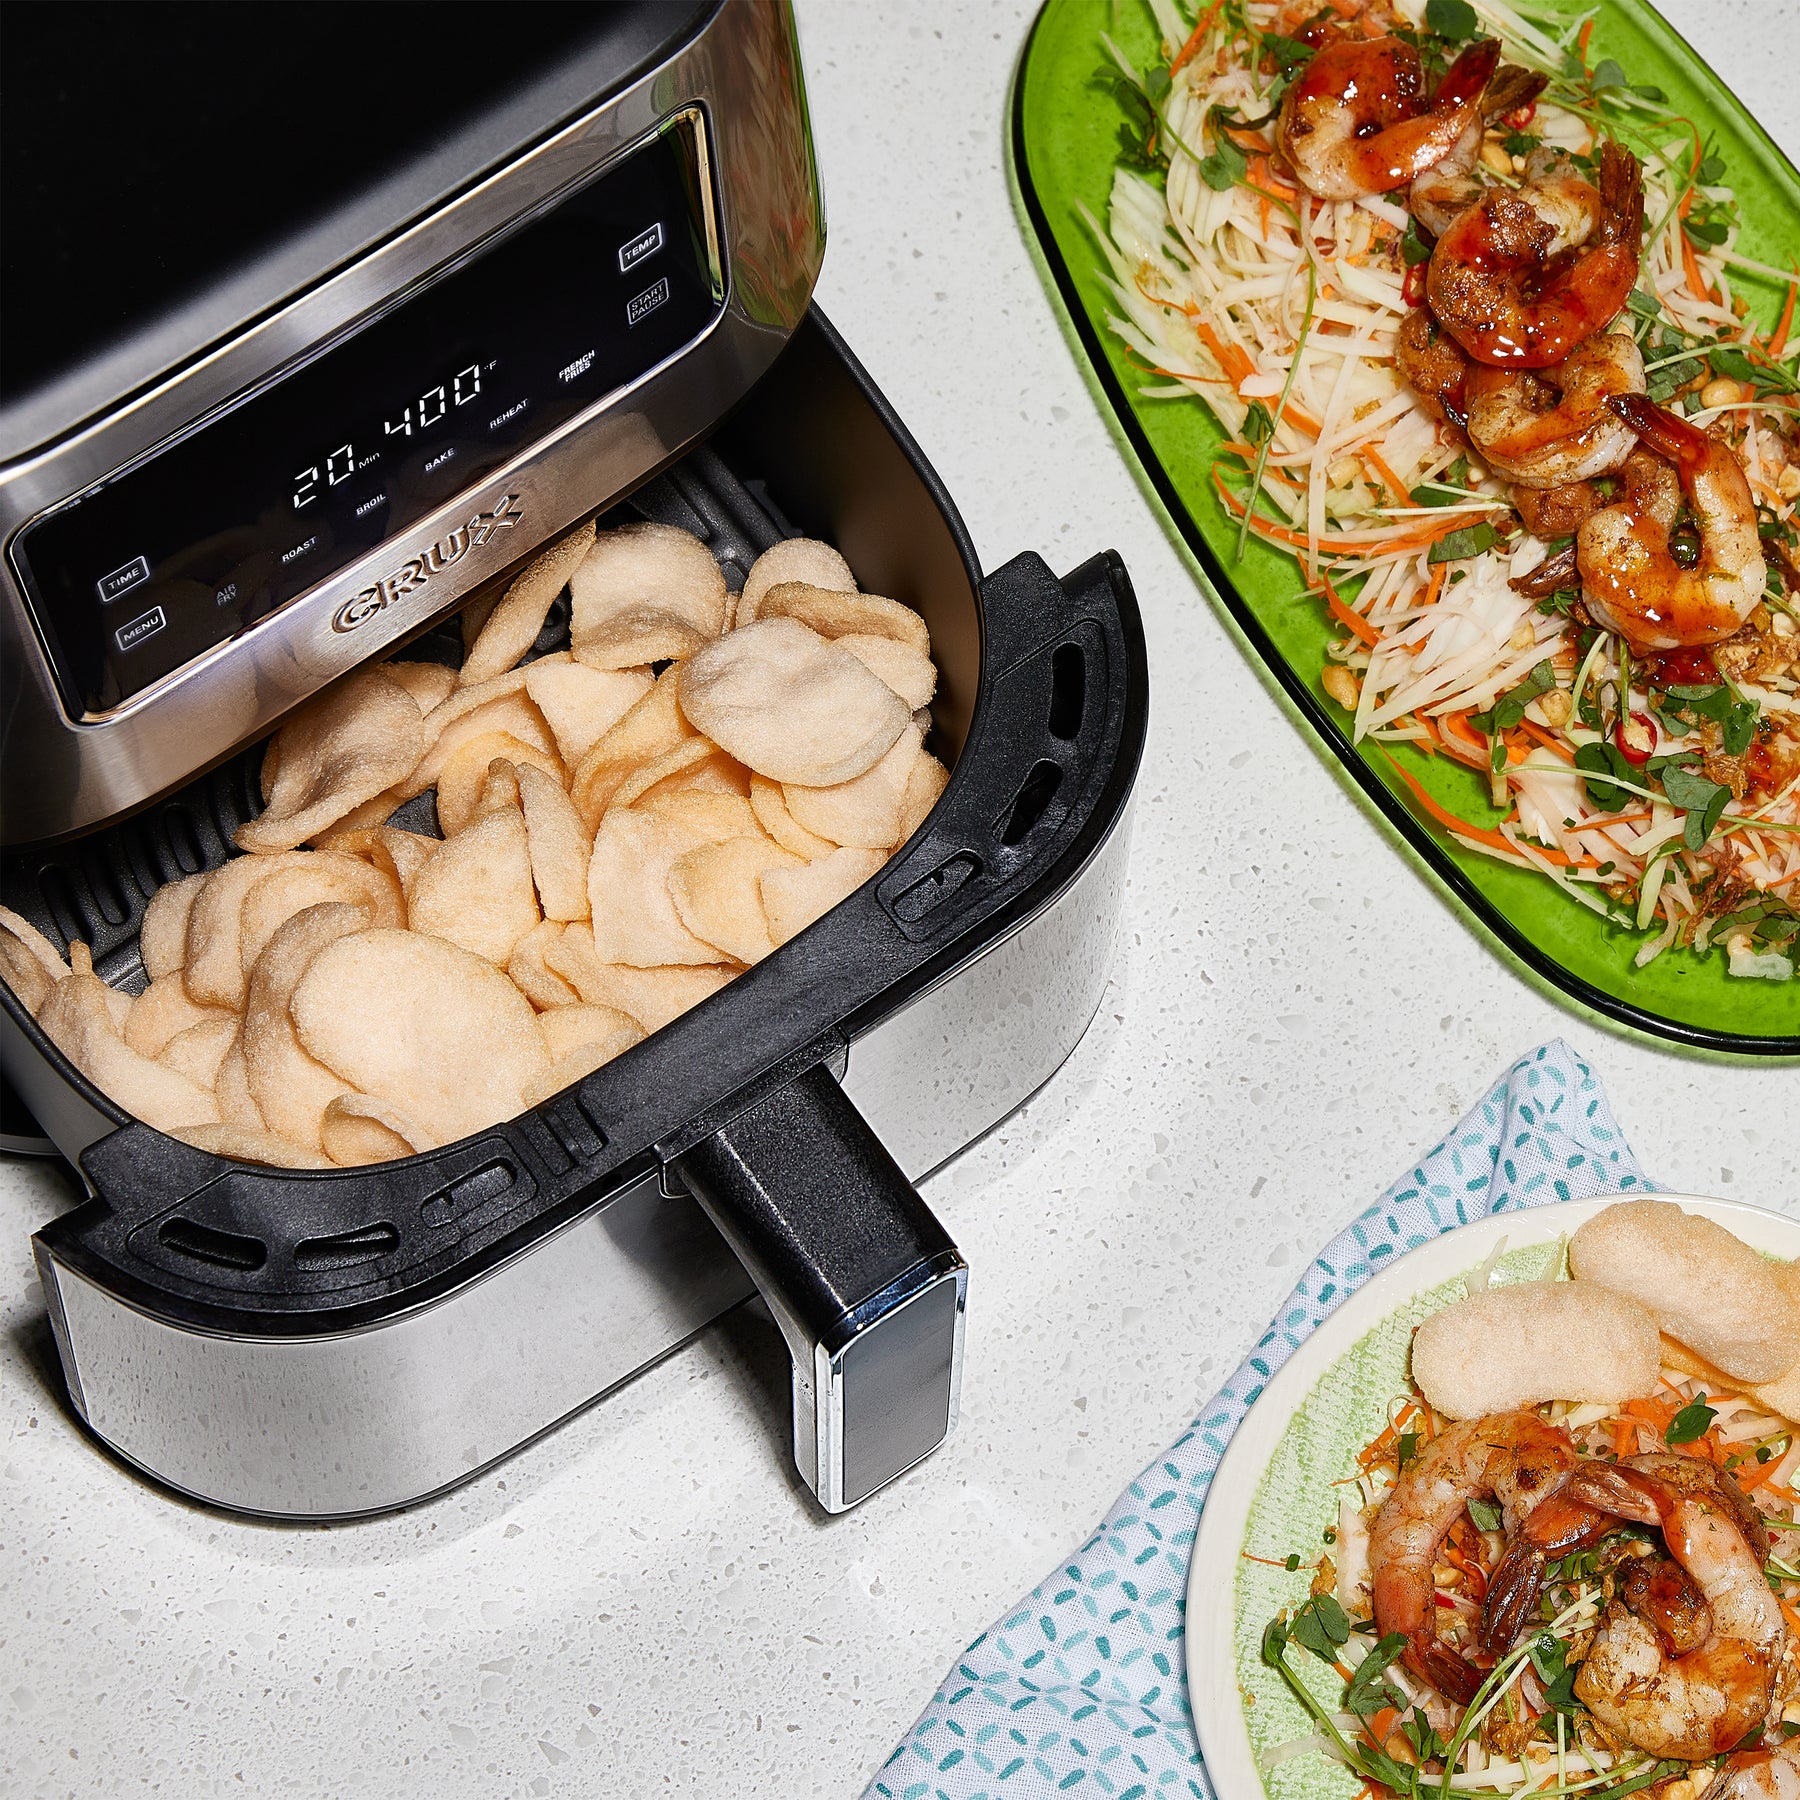 Crux 17115 Created for Macy's Air Fryer Review - Consumer Reports